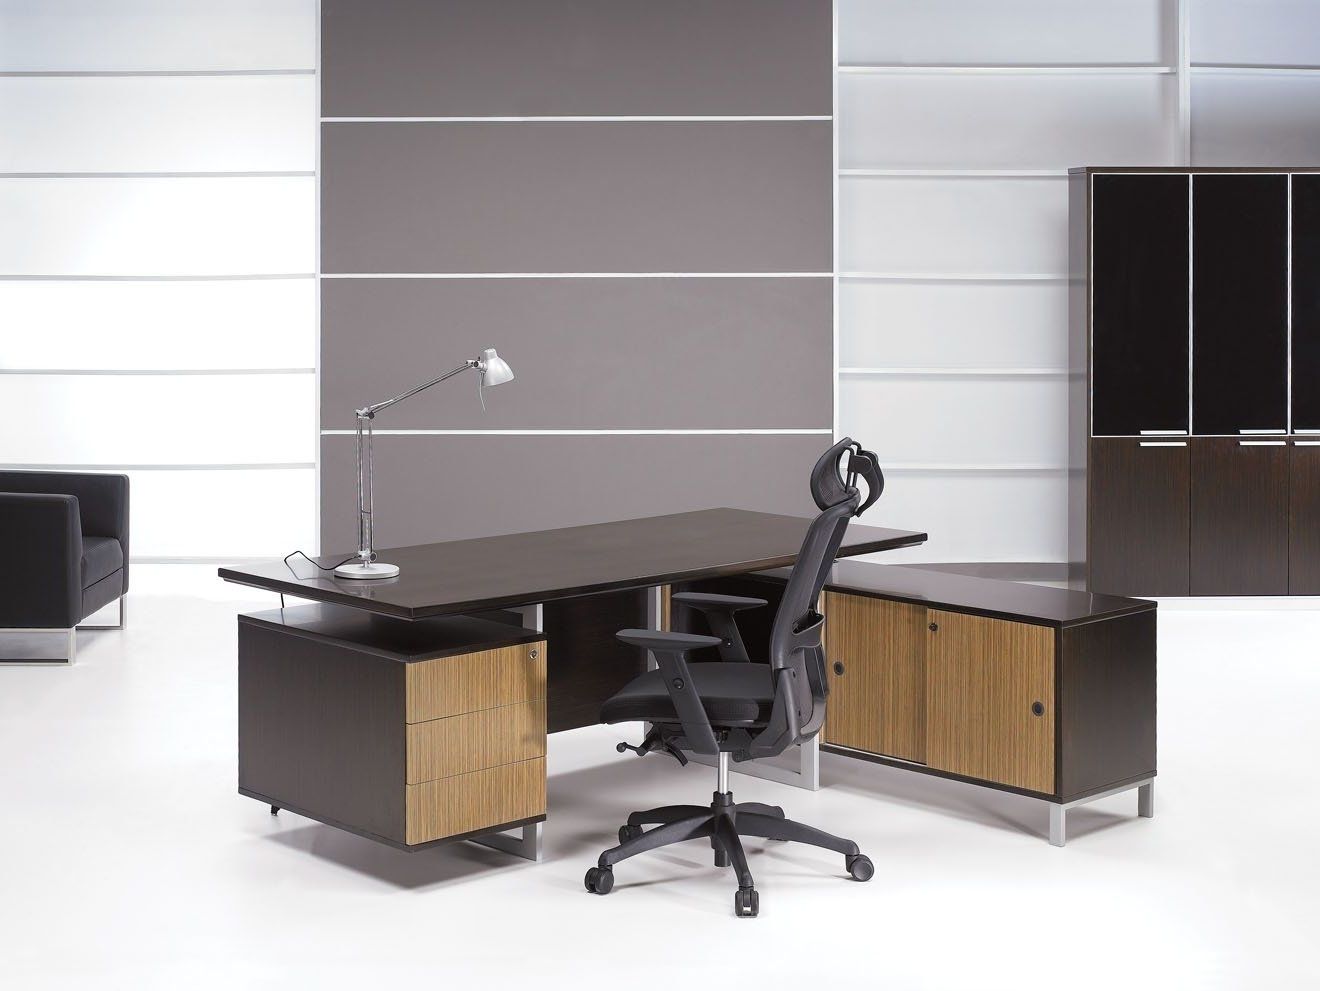 Modern Office L Desk Furniture With Storage Adding Executive Intended For Most Up To Date Contemporary Executive Office Chairs (View 9 of 20)